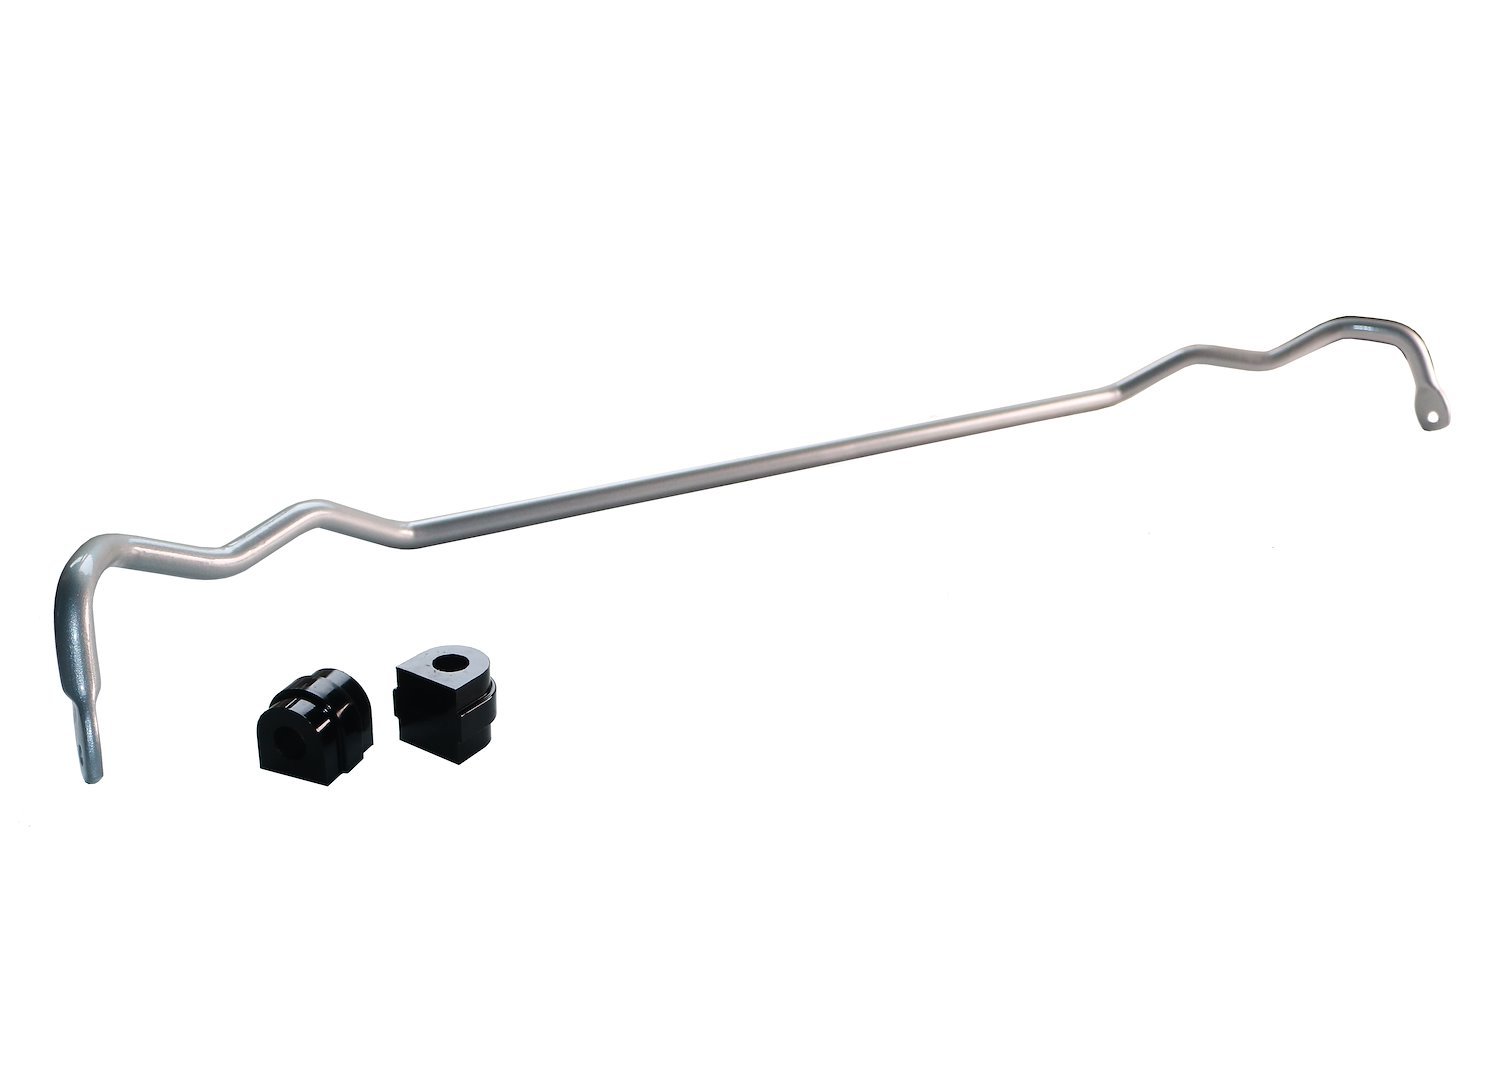 BBR44 Rear 20 mm Sway Bar for BMW 1 Series (Exc M Series) and 3 Series (Exc M3)